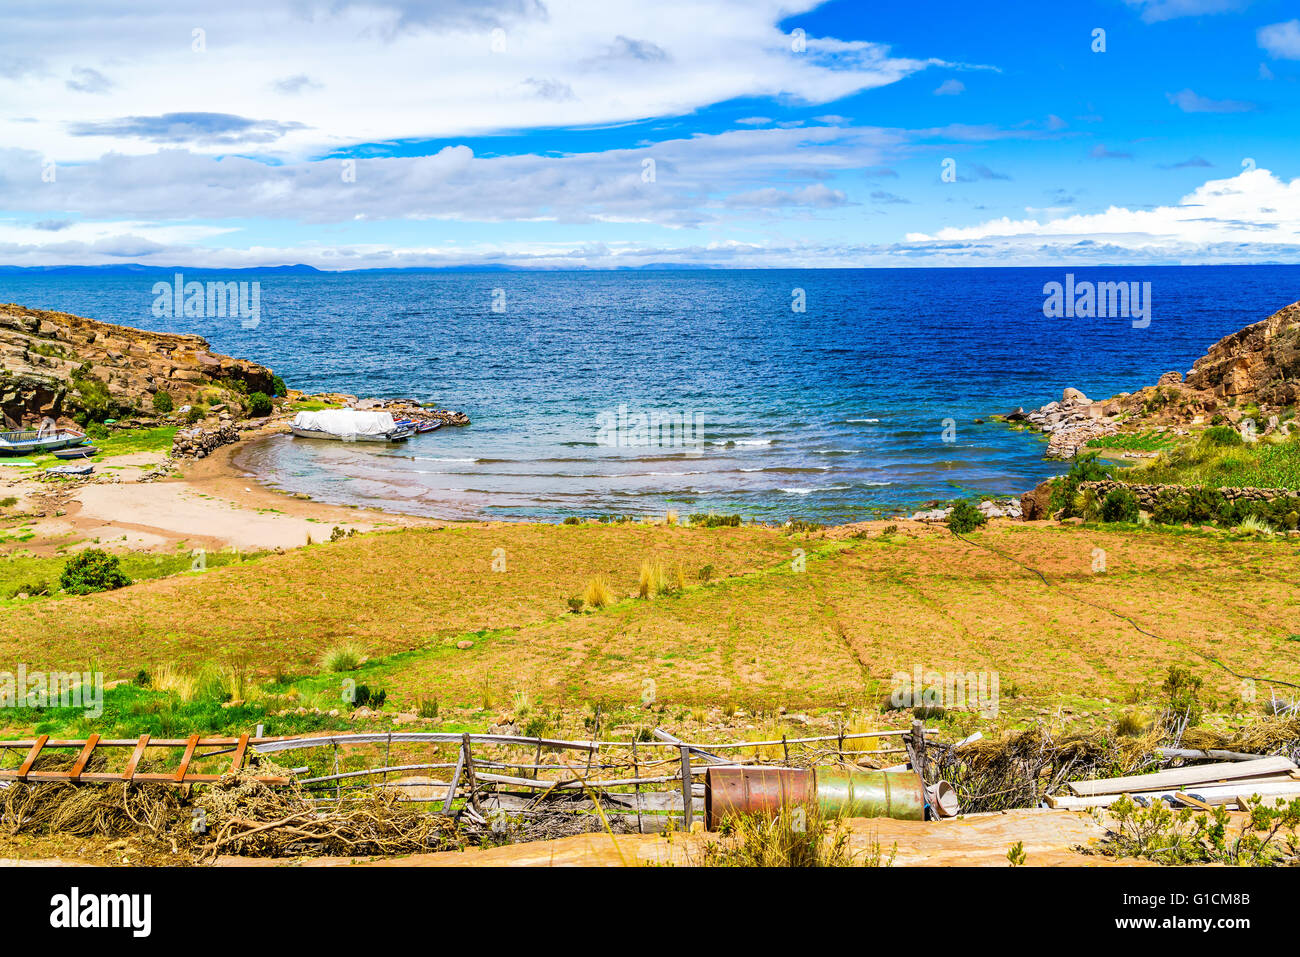 View of Lake Titicaca, the largest high altitude lake in the world this picture was taken in Peruvian side Stock Photo